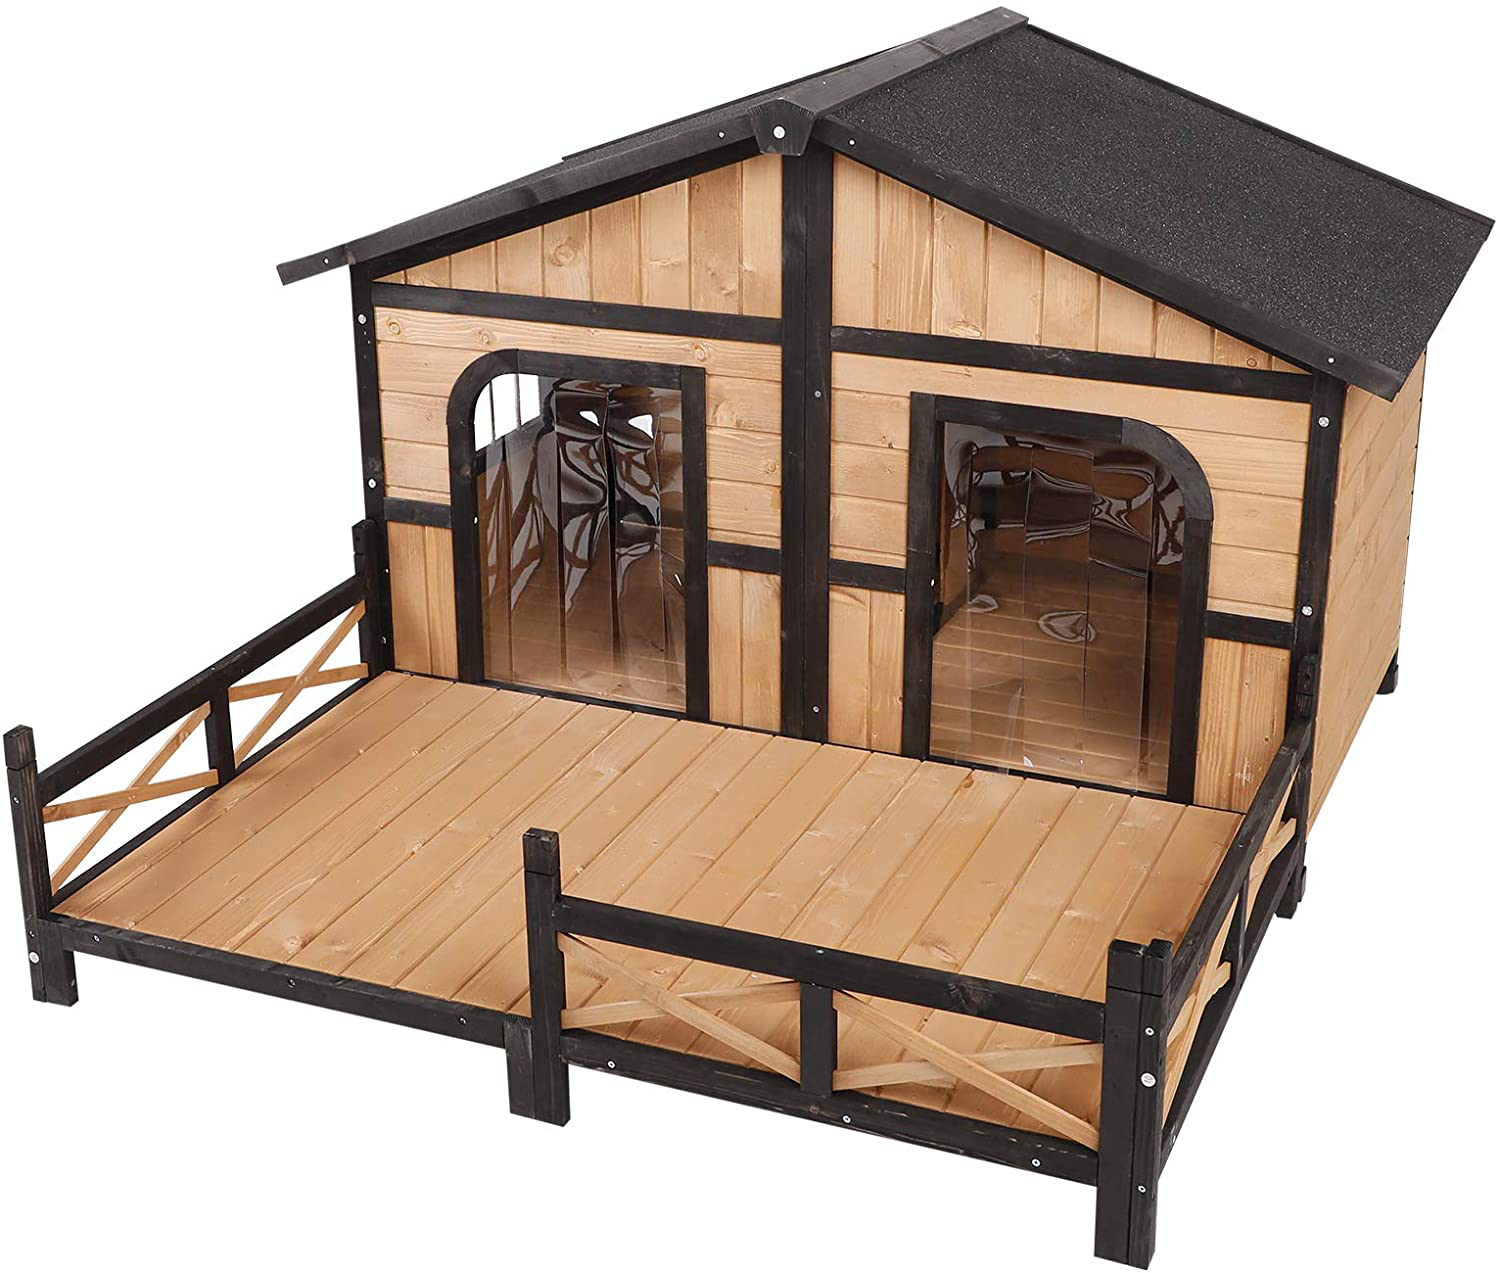 Pawhut 59"X64"X39" Wood Large Dog House Cabin Style Elevated Pet Shelter W/Porch Deck